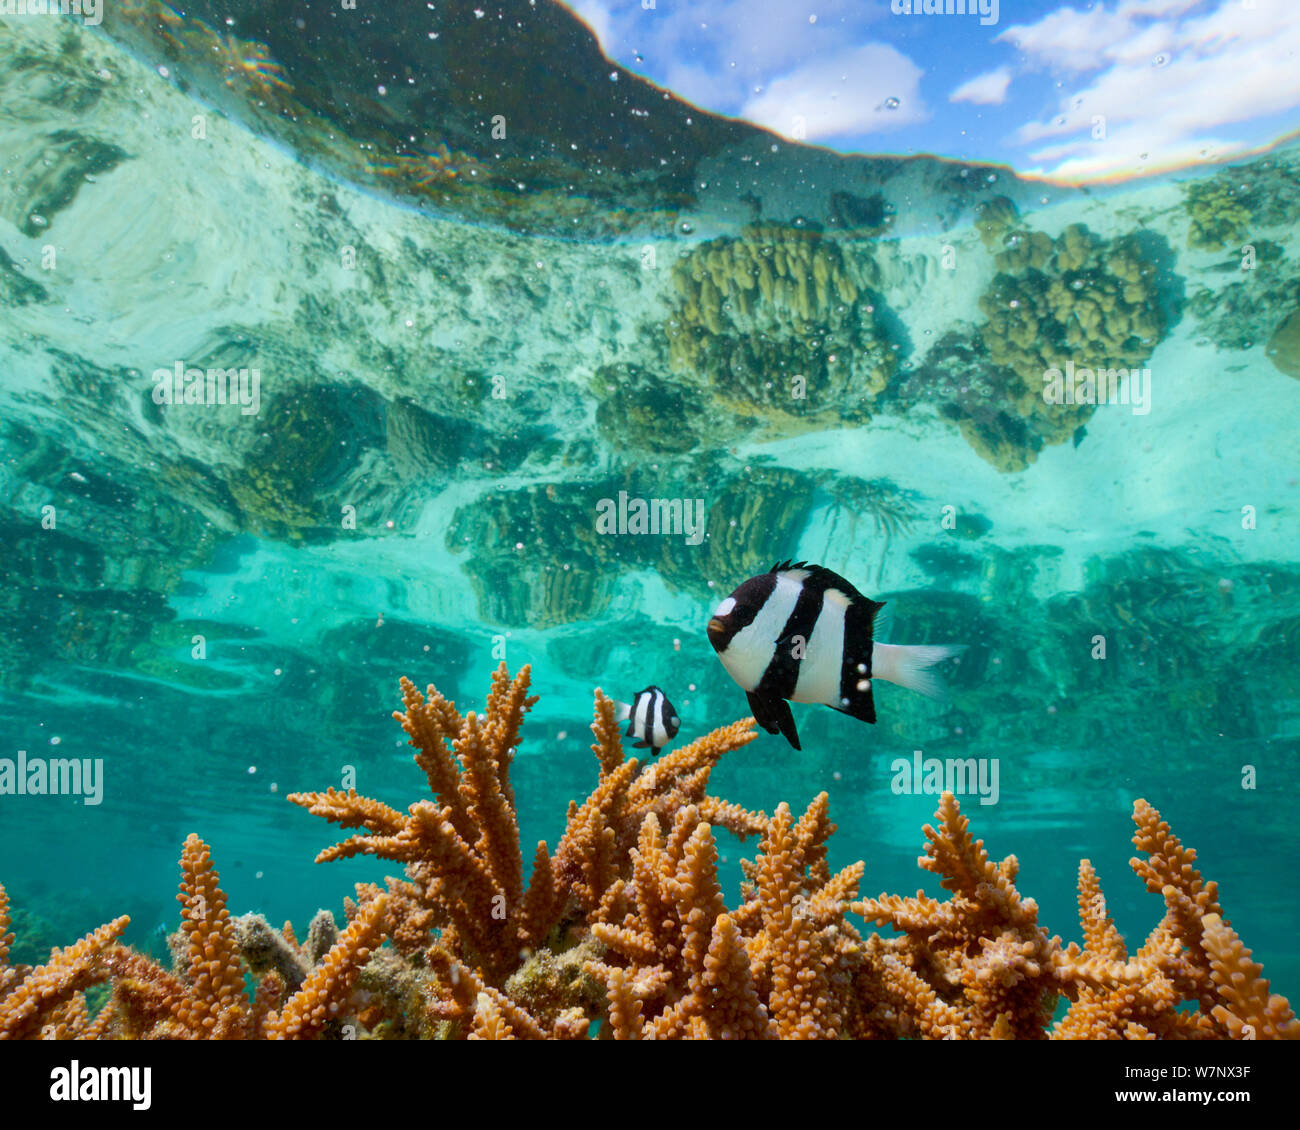 Humbug dascyllus (Dascyllus aruanus)  guarding his patch of staghorn coral in a shallow lagoon on Ofu, American Samoa. January. The window of sky above is a result of the phenomenon known as Snell's Window. Stock Photo